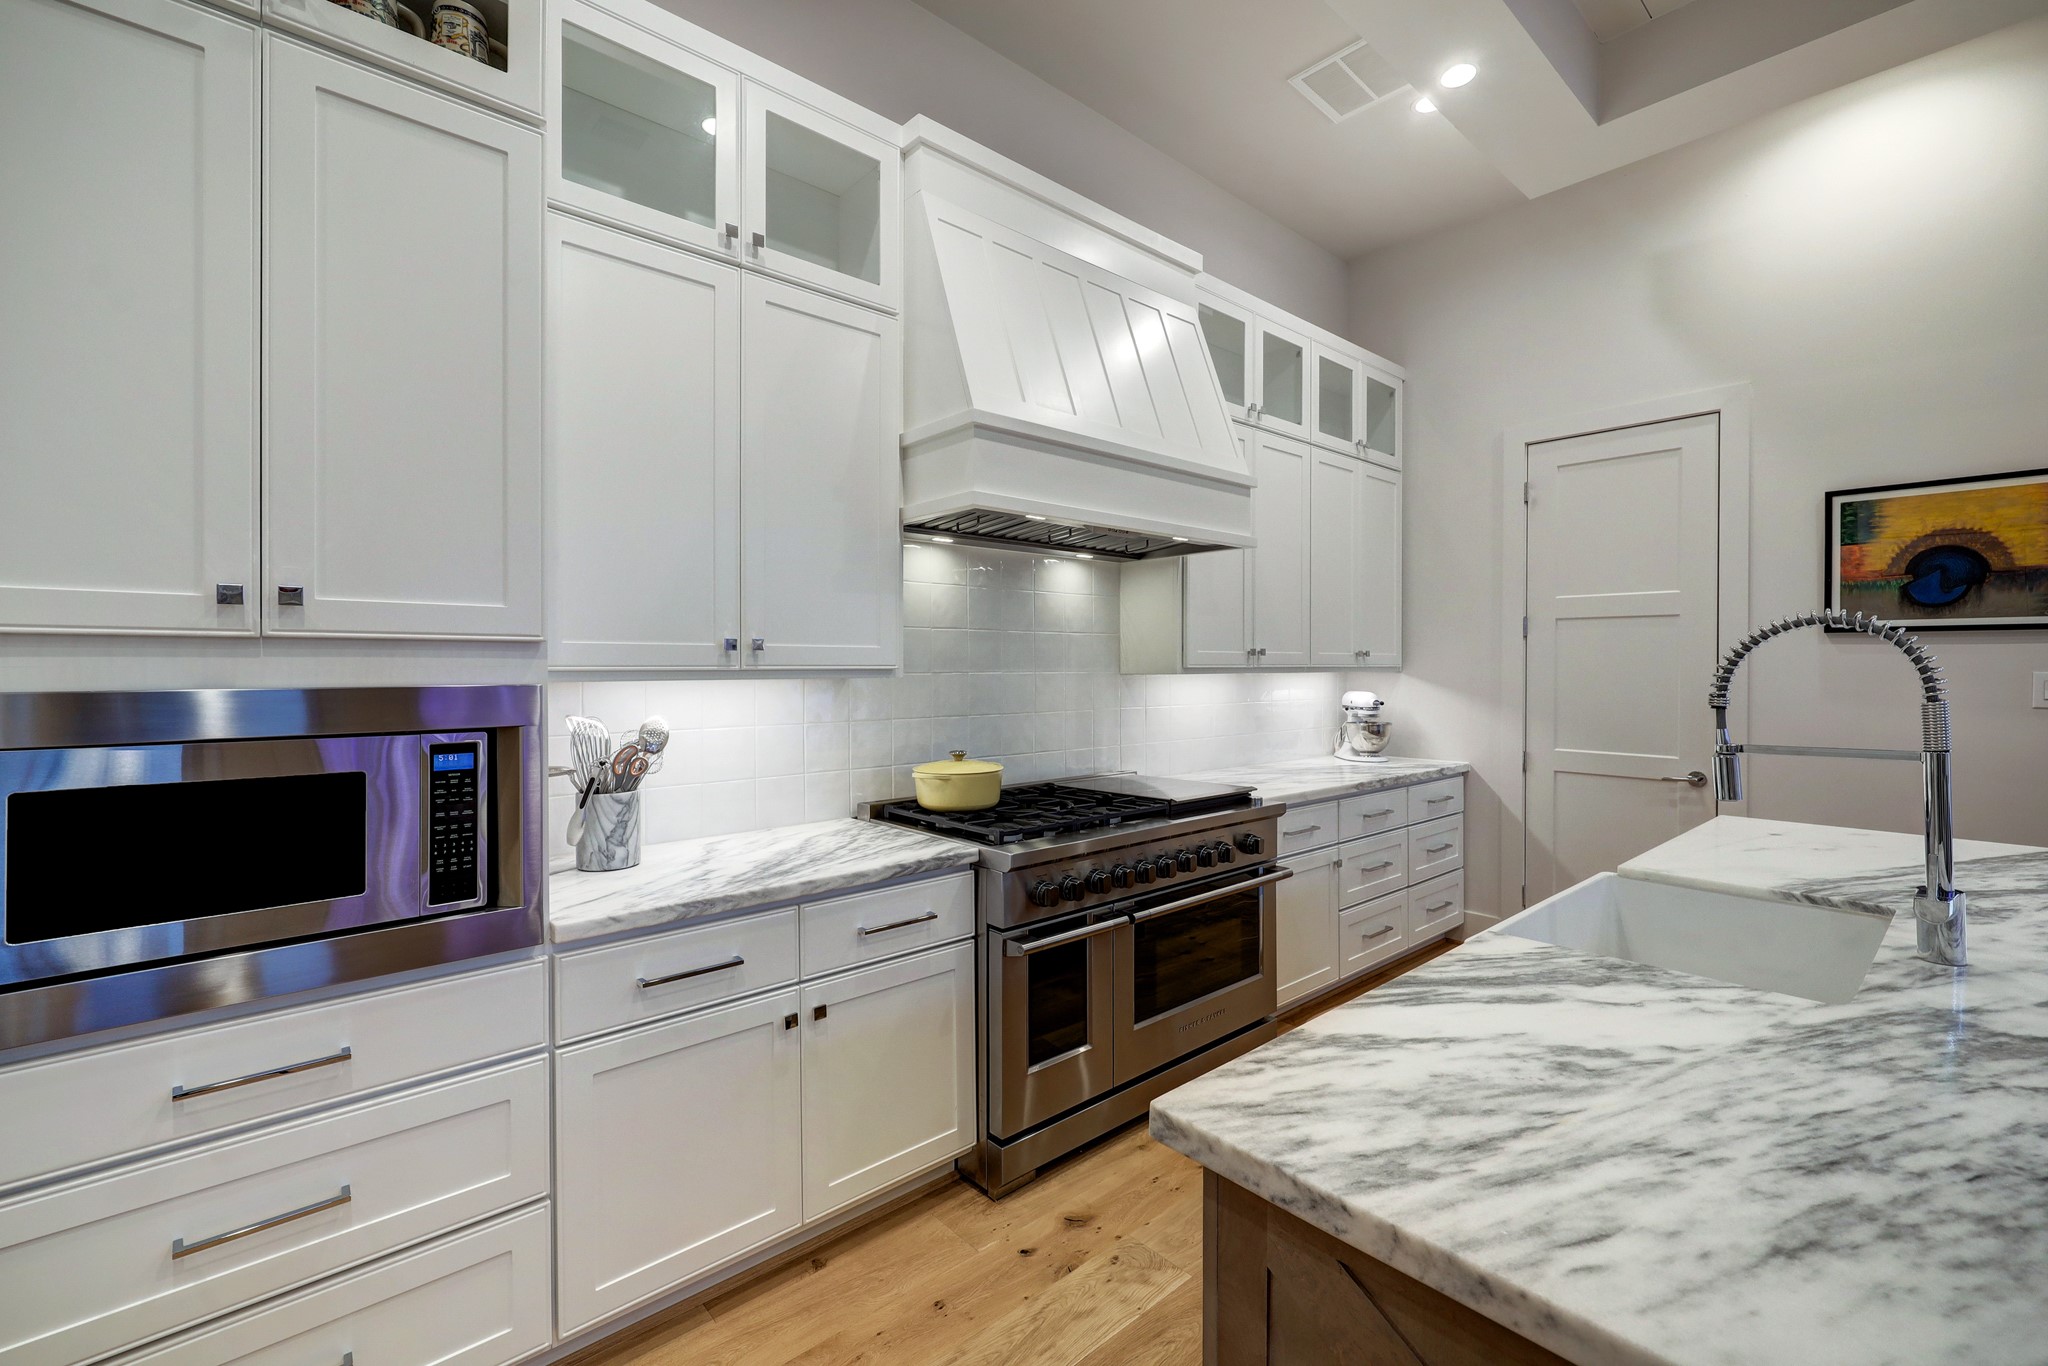 Chefs will love this exquisite gourmet kitchen filled with crisp white custom cabinetry, a large island/breakfast bar and rich marble countertops.